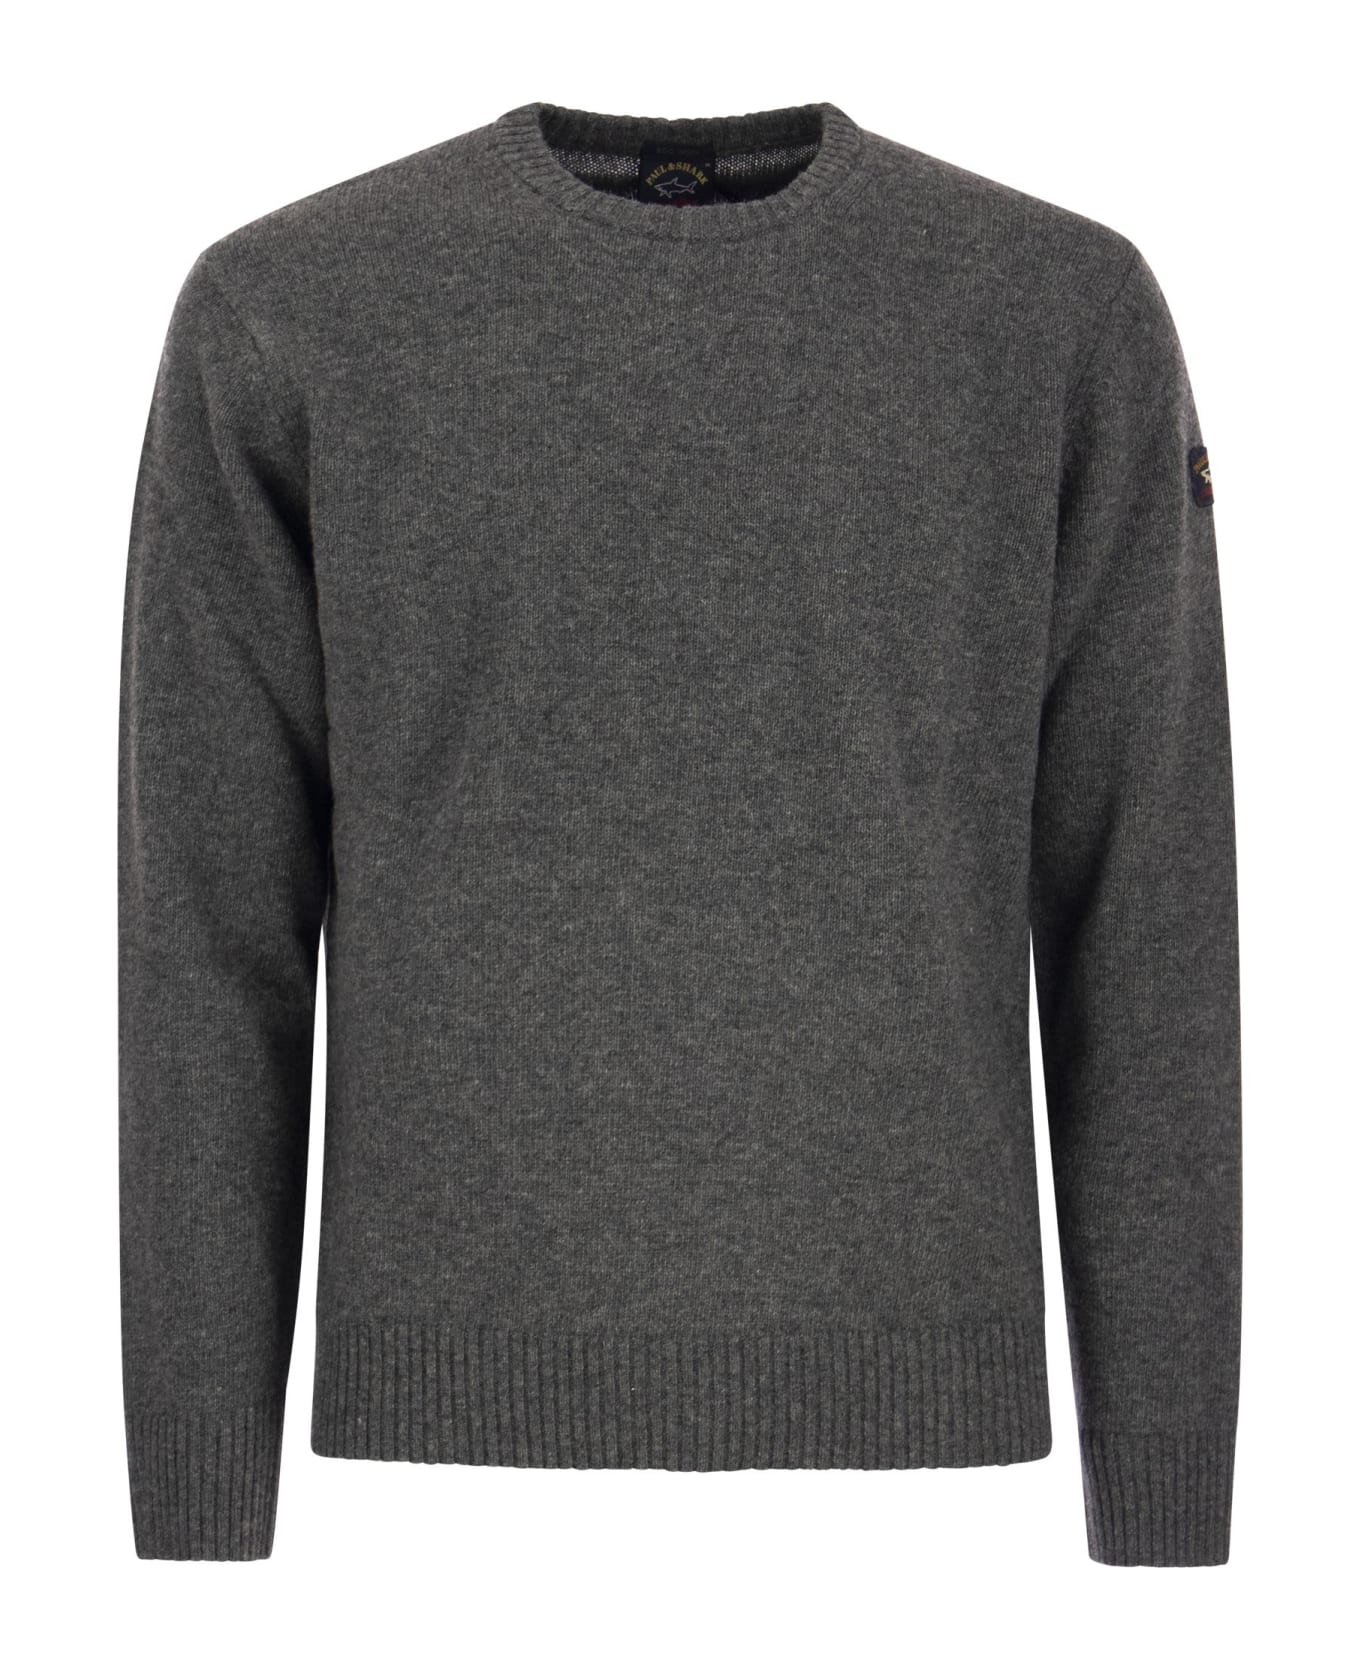 Paul&Shark Wool Crew Neck With Arm Patch - Grey ニットウェア